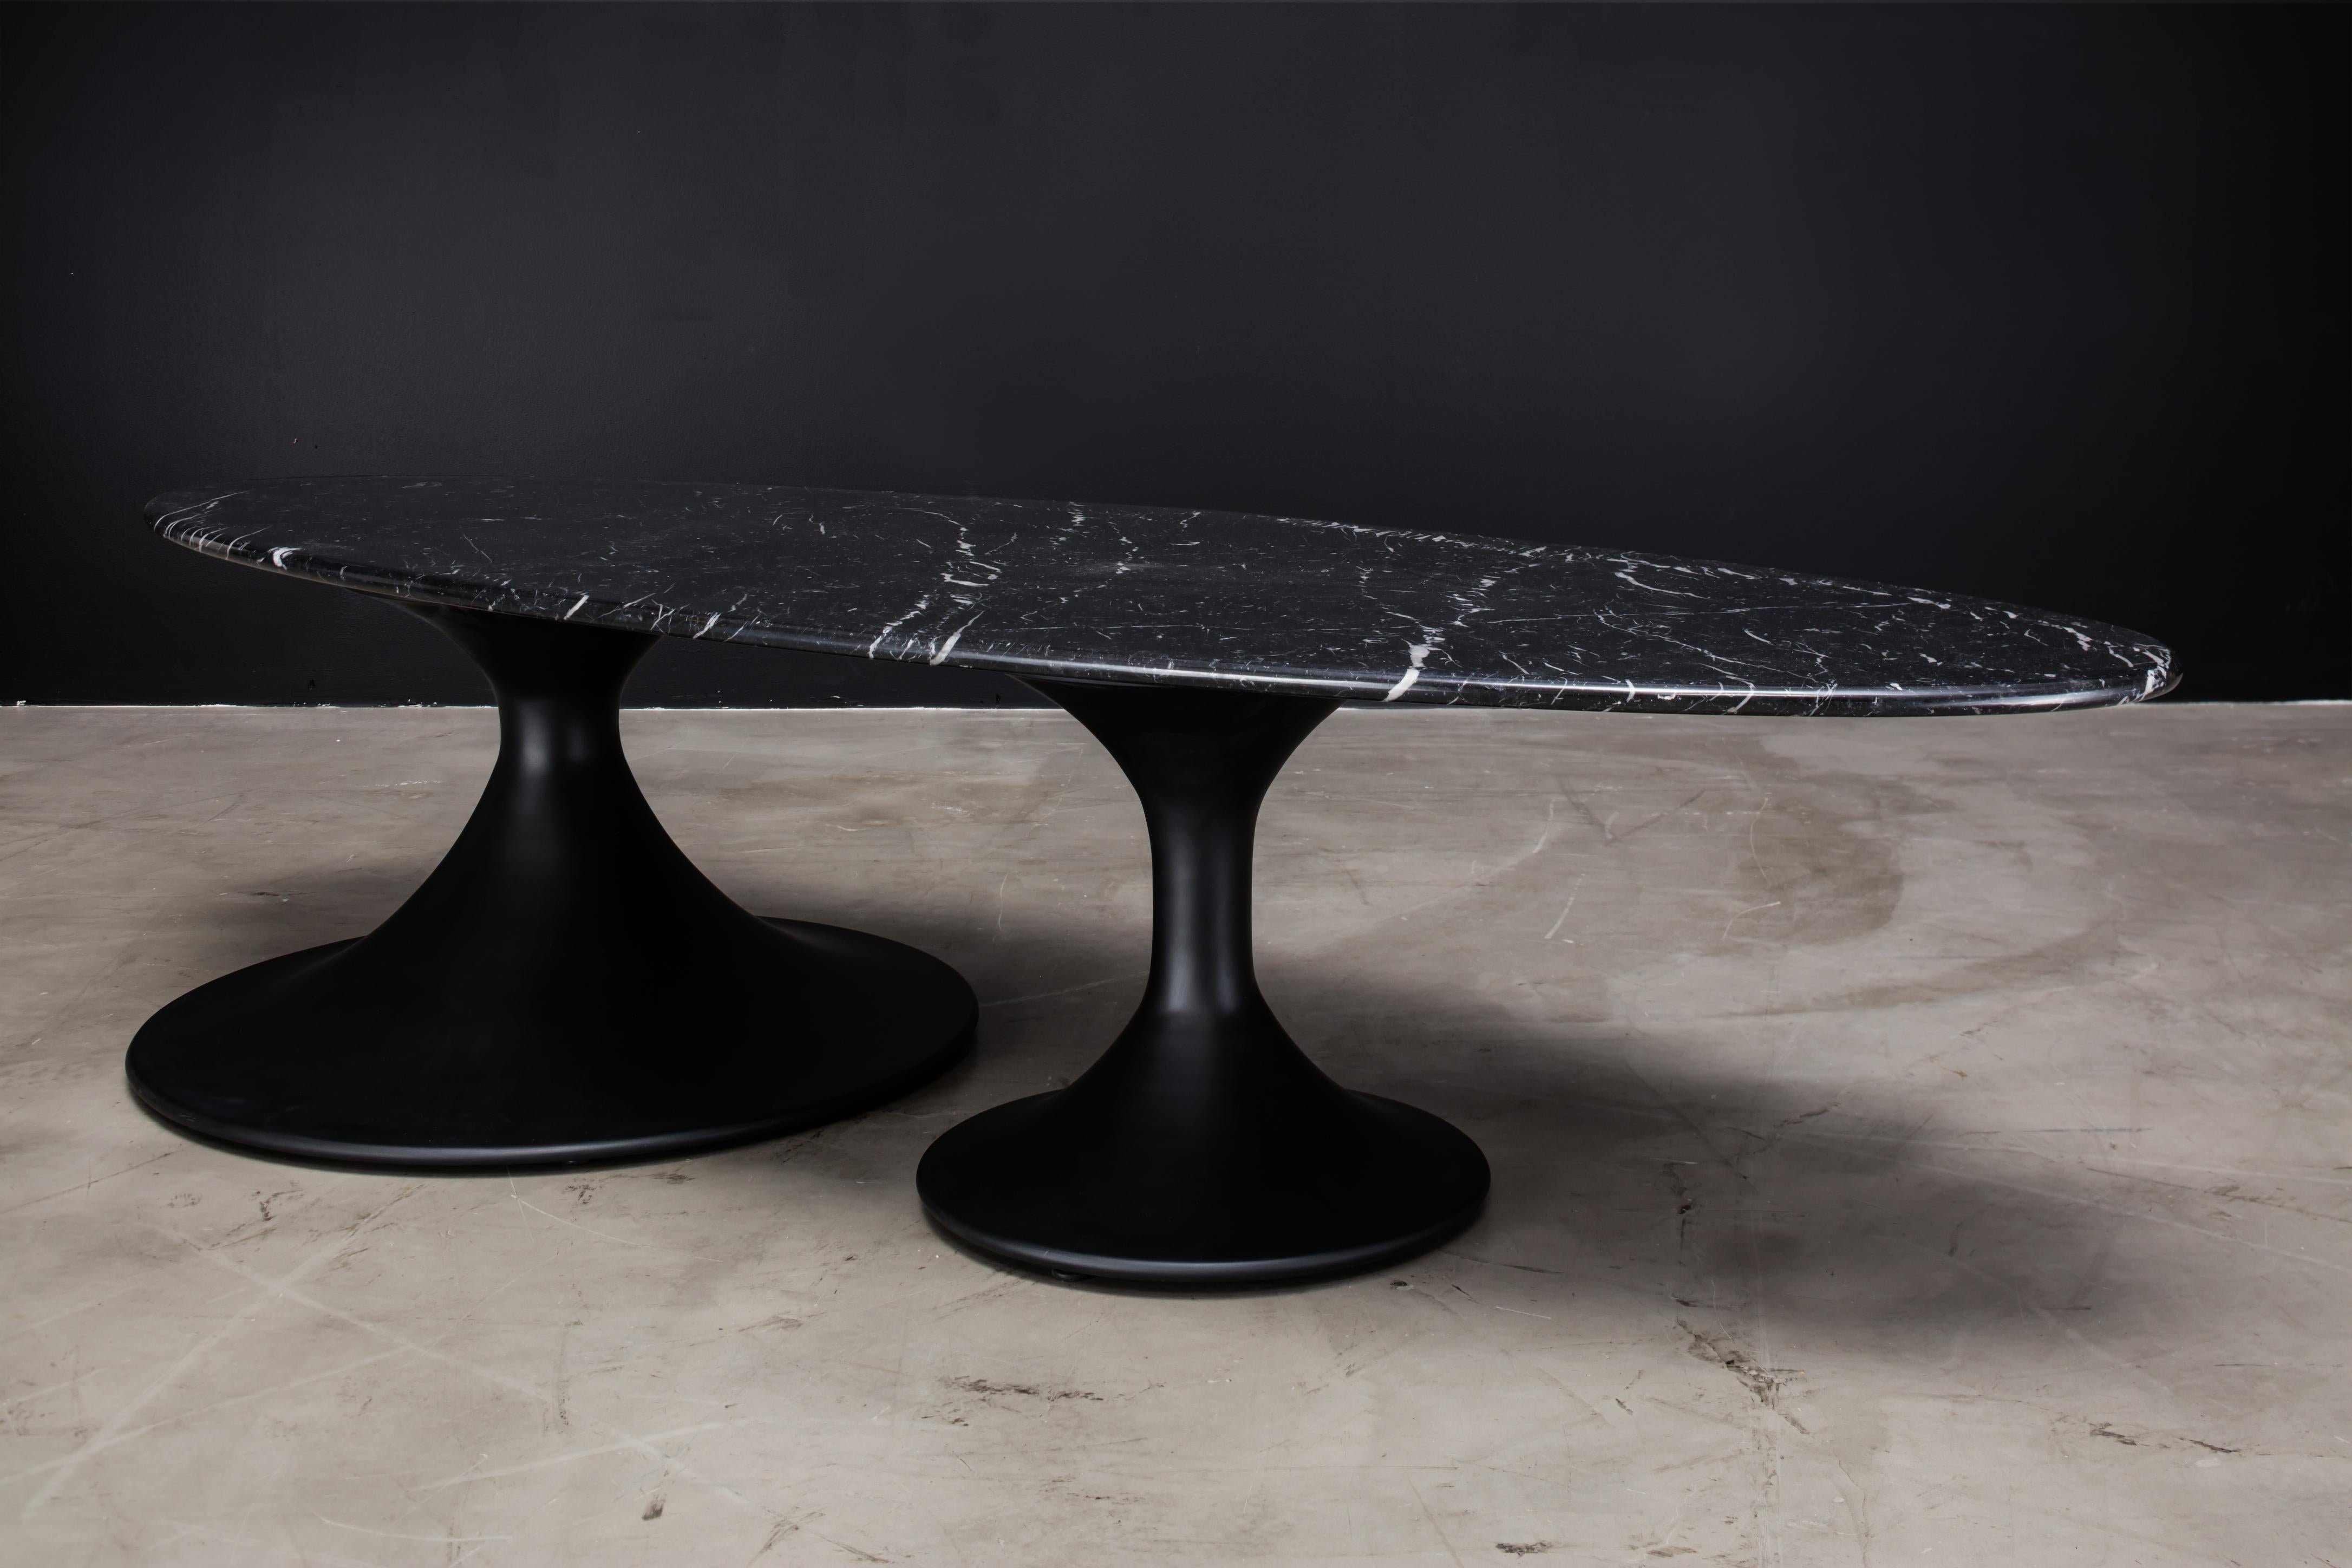 DRIP COFFEE TABLE - Powder-Coated Black and Nero Marquina Marble

The Drip coffee table is a contemporary and unique cocktail table that will surely add character to any living room. The table is constructed from powder-coated metal, providing a